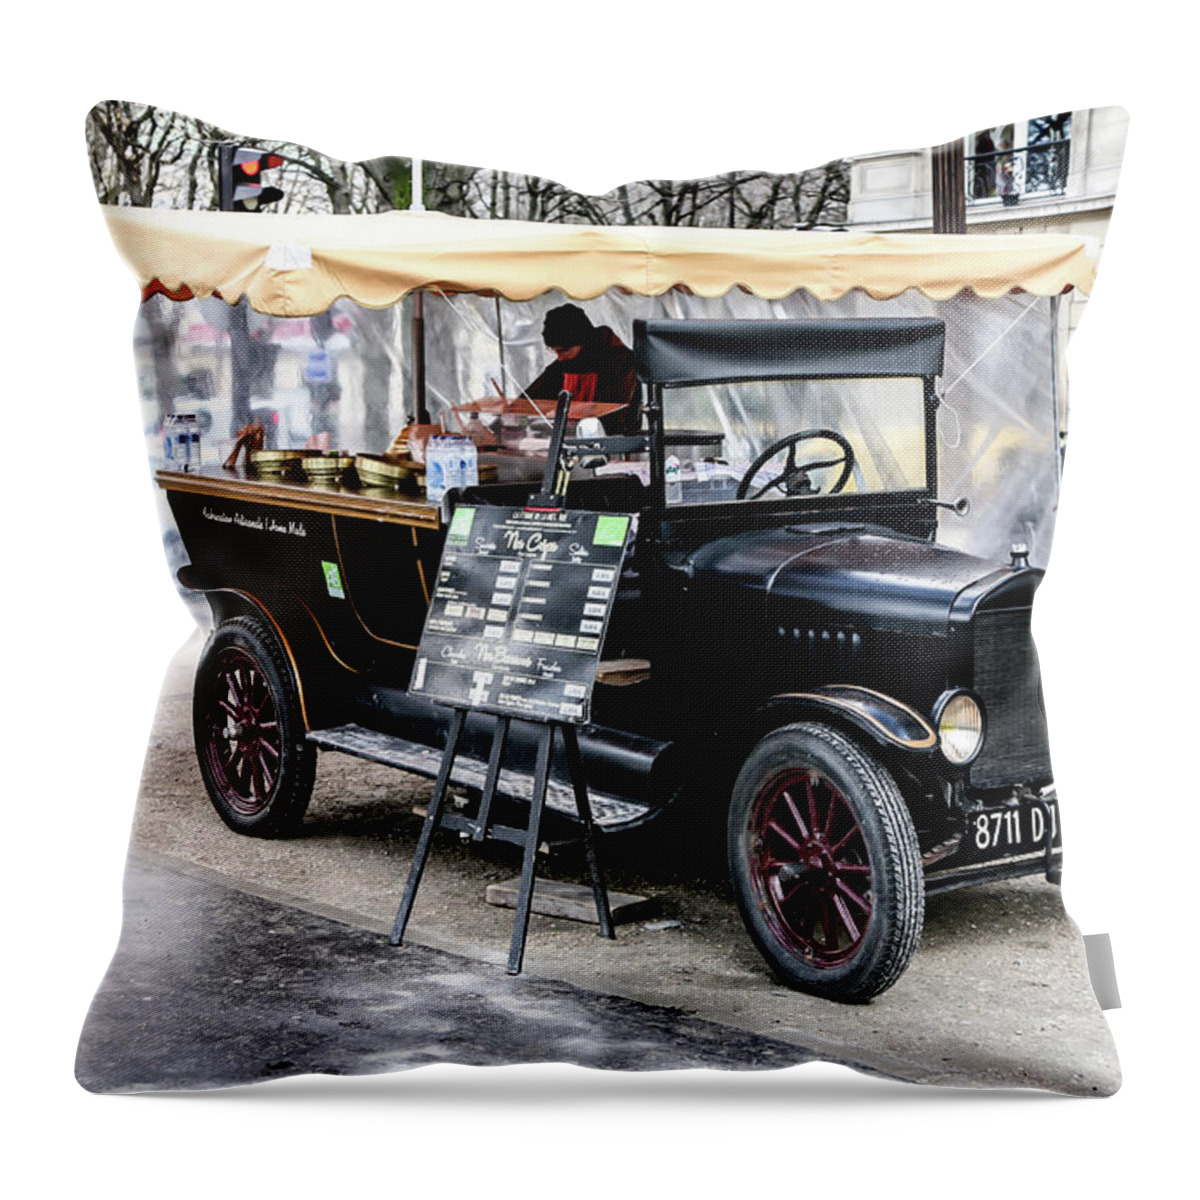 Midnight Throw Pillow featuring the digital art Street Car Cafe by Birdly Canada